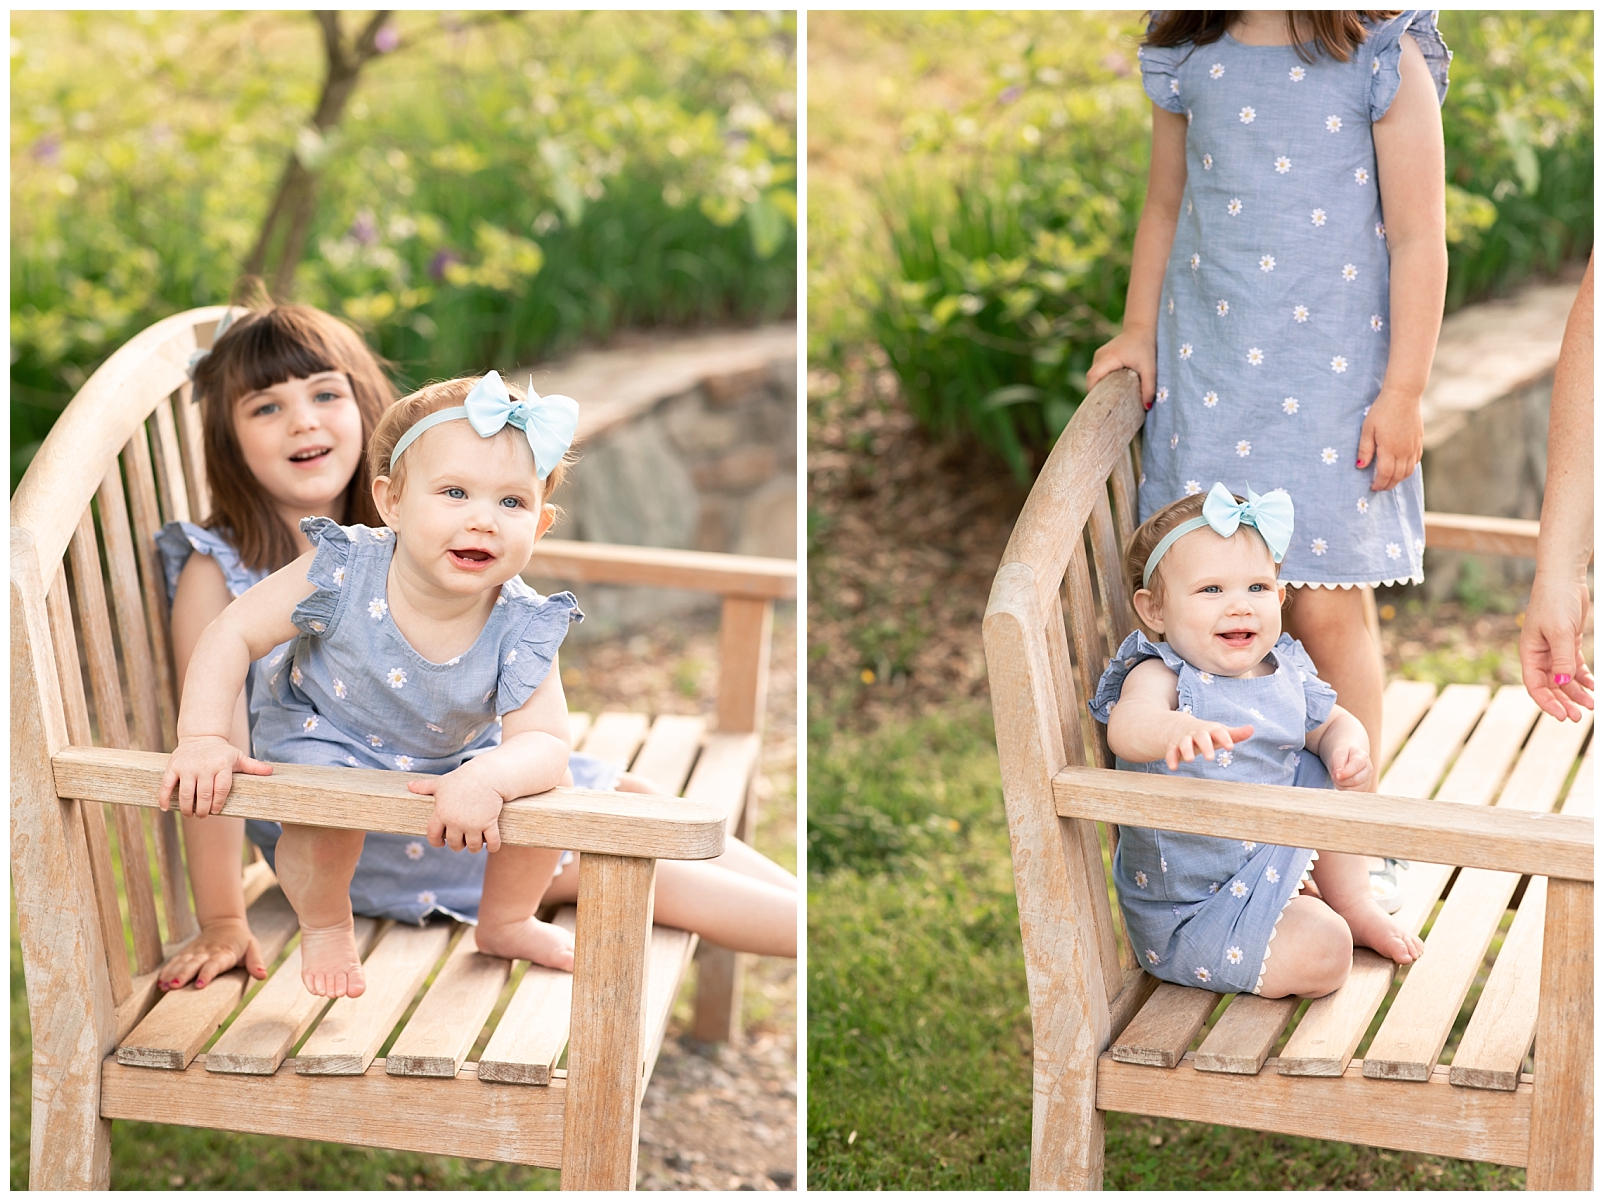 Sisters sitting on a wooden bench in a garden